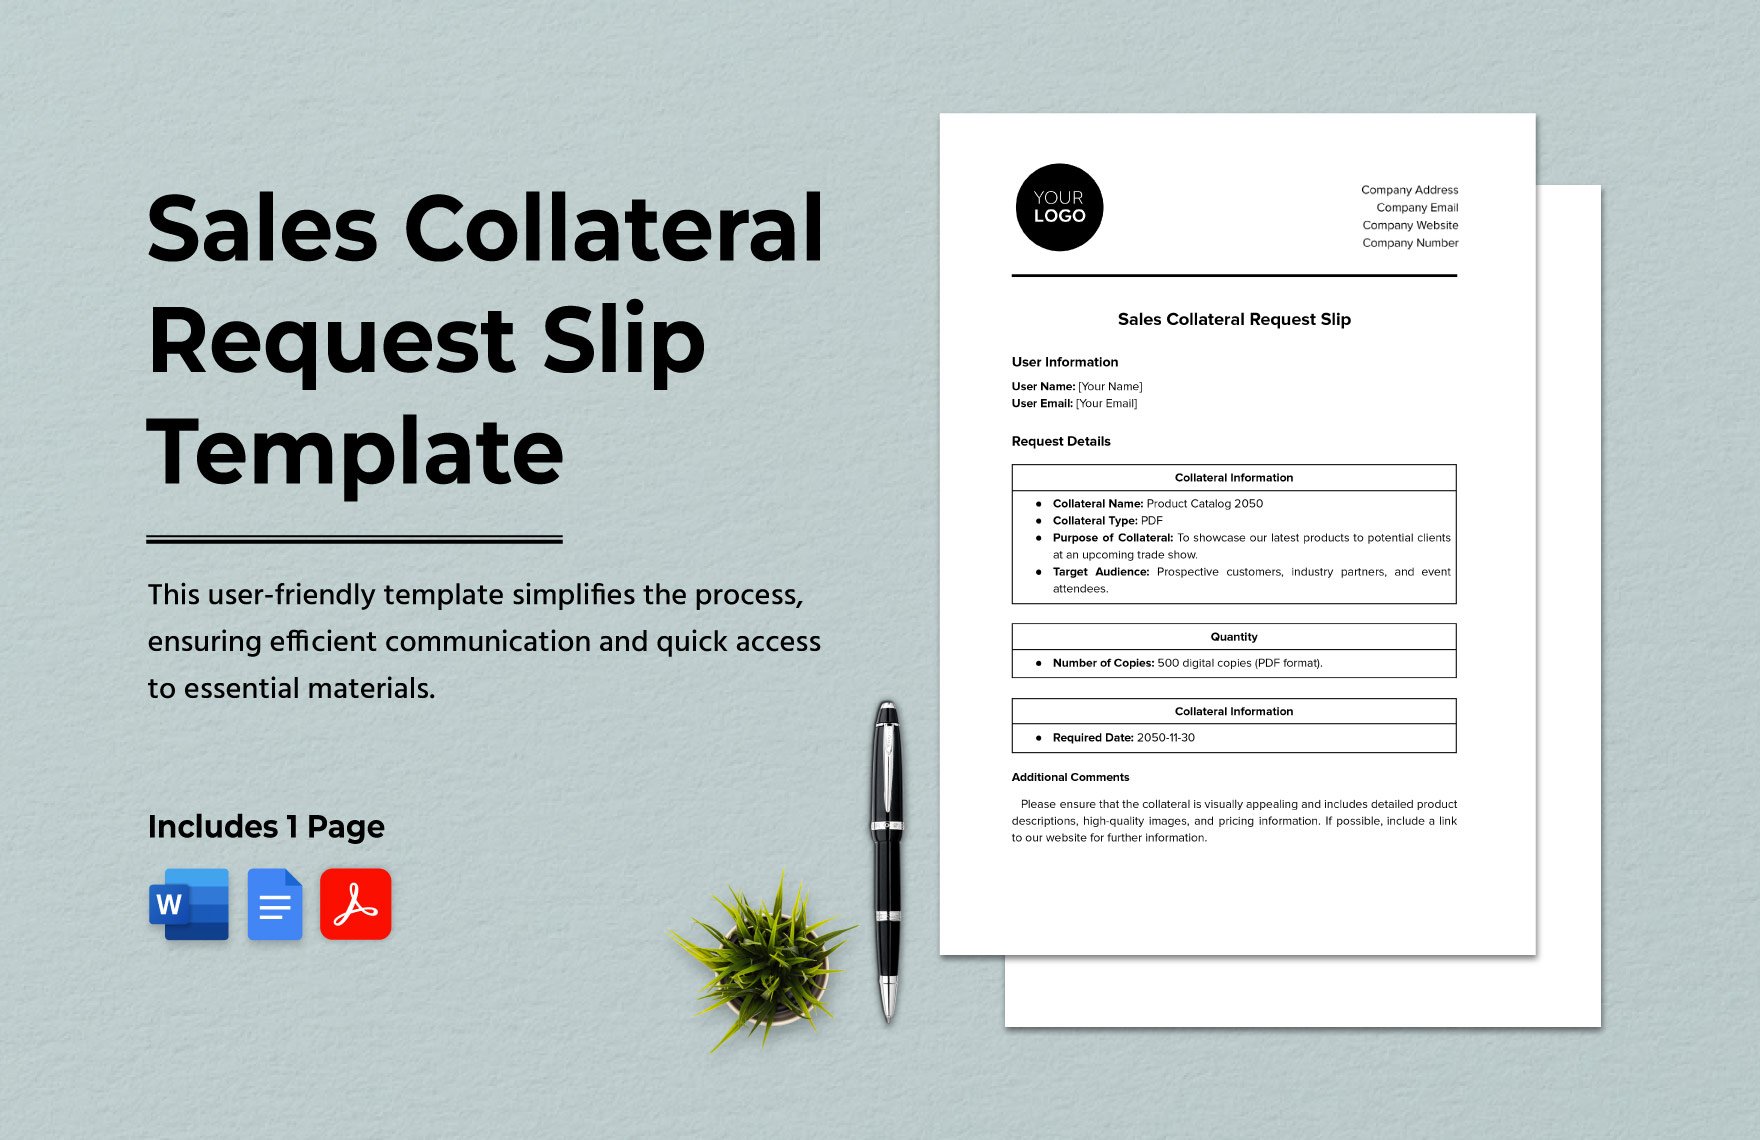 Sales Collateral Request Slip Template in Word, Google Docs, PDF